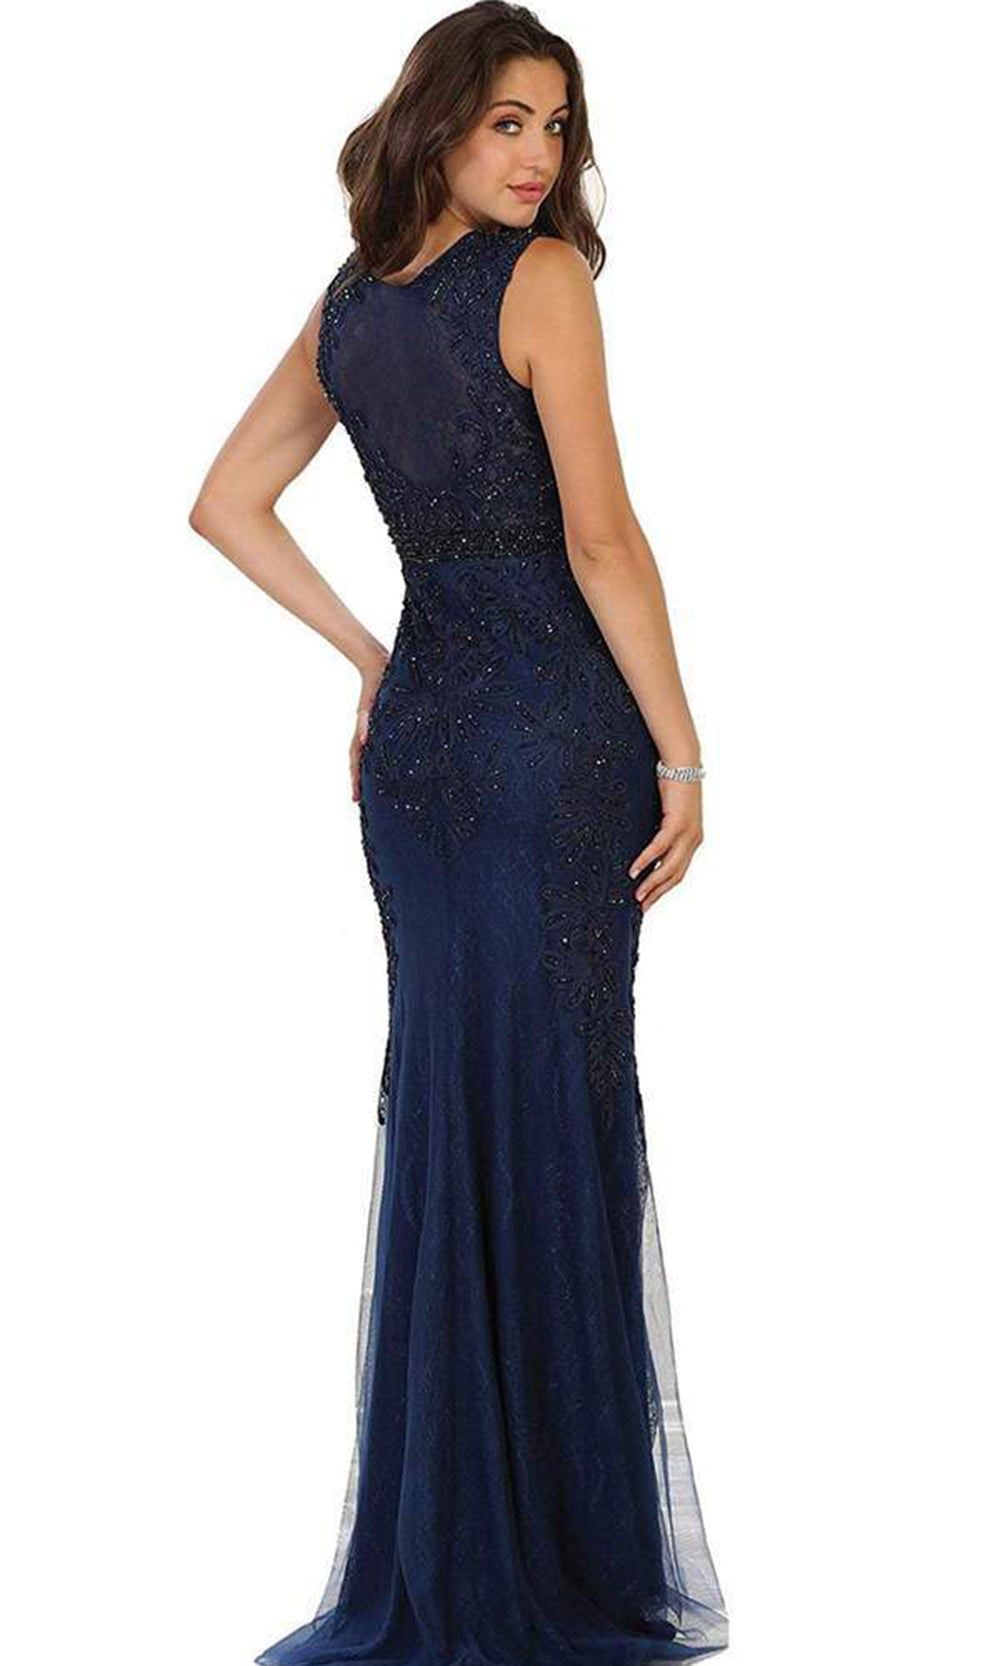 May Queen - Beaded Illusion Bateau Sheath Evening Gown RQ7524 - 1 Pc Mauve in Size 10 and 1 Pc Black in Size 14 Available CCSALE 14 / Navy